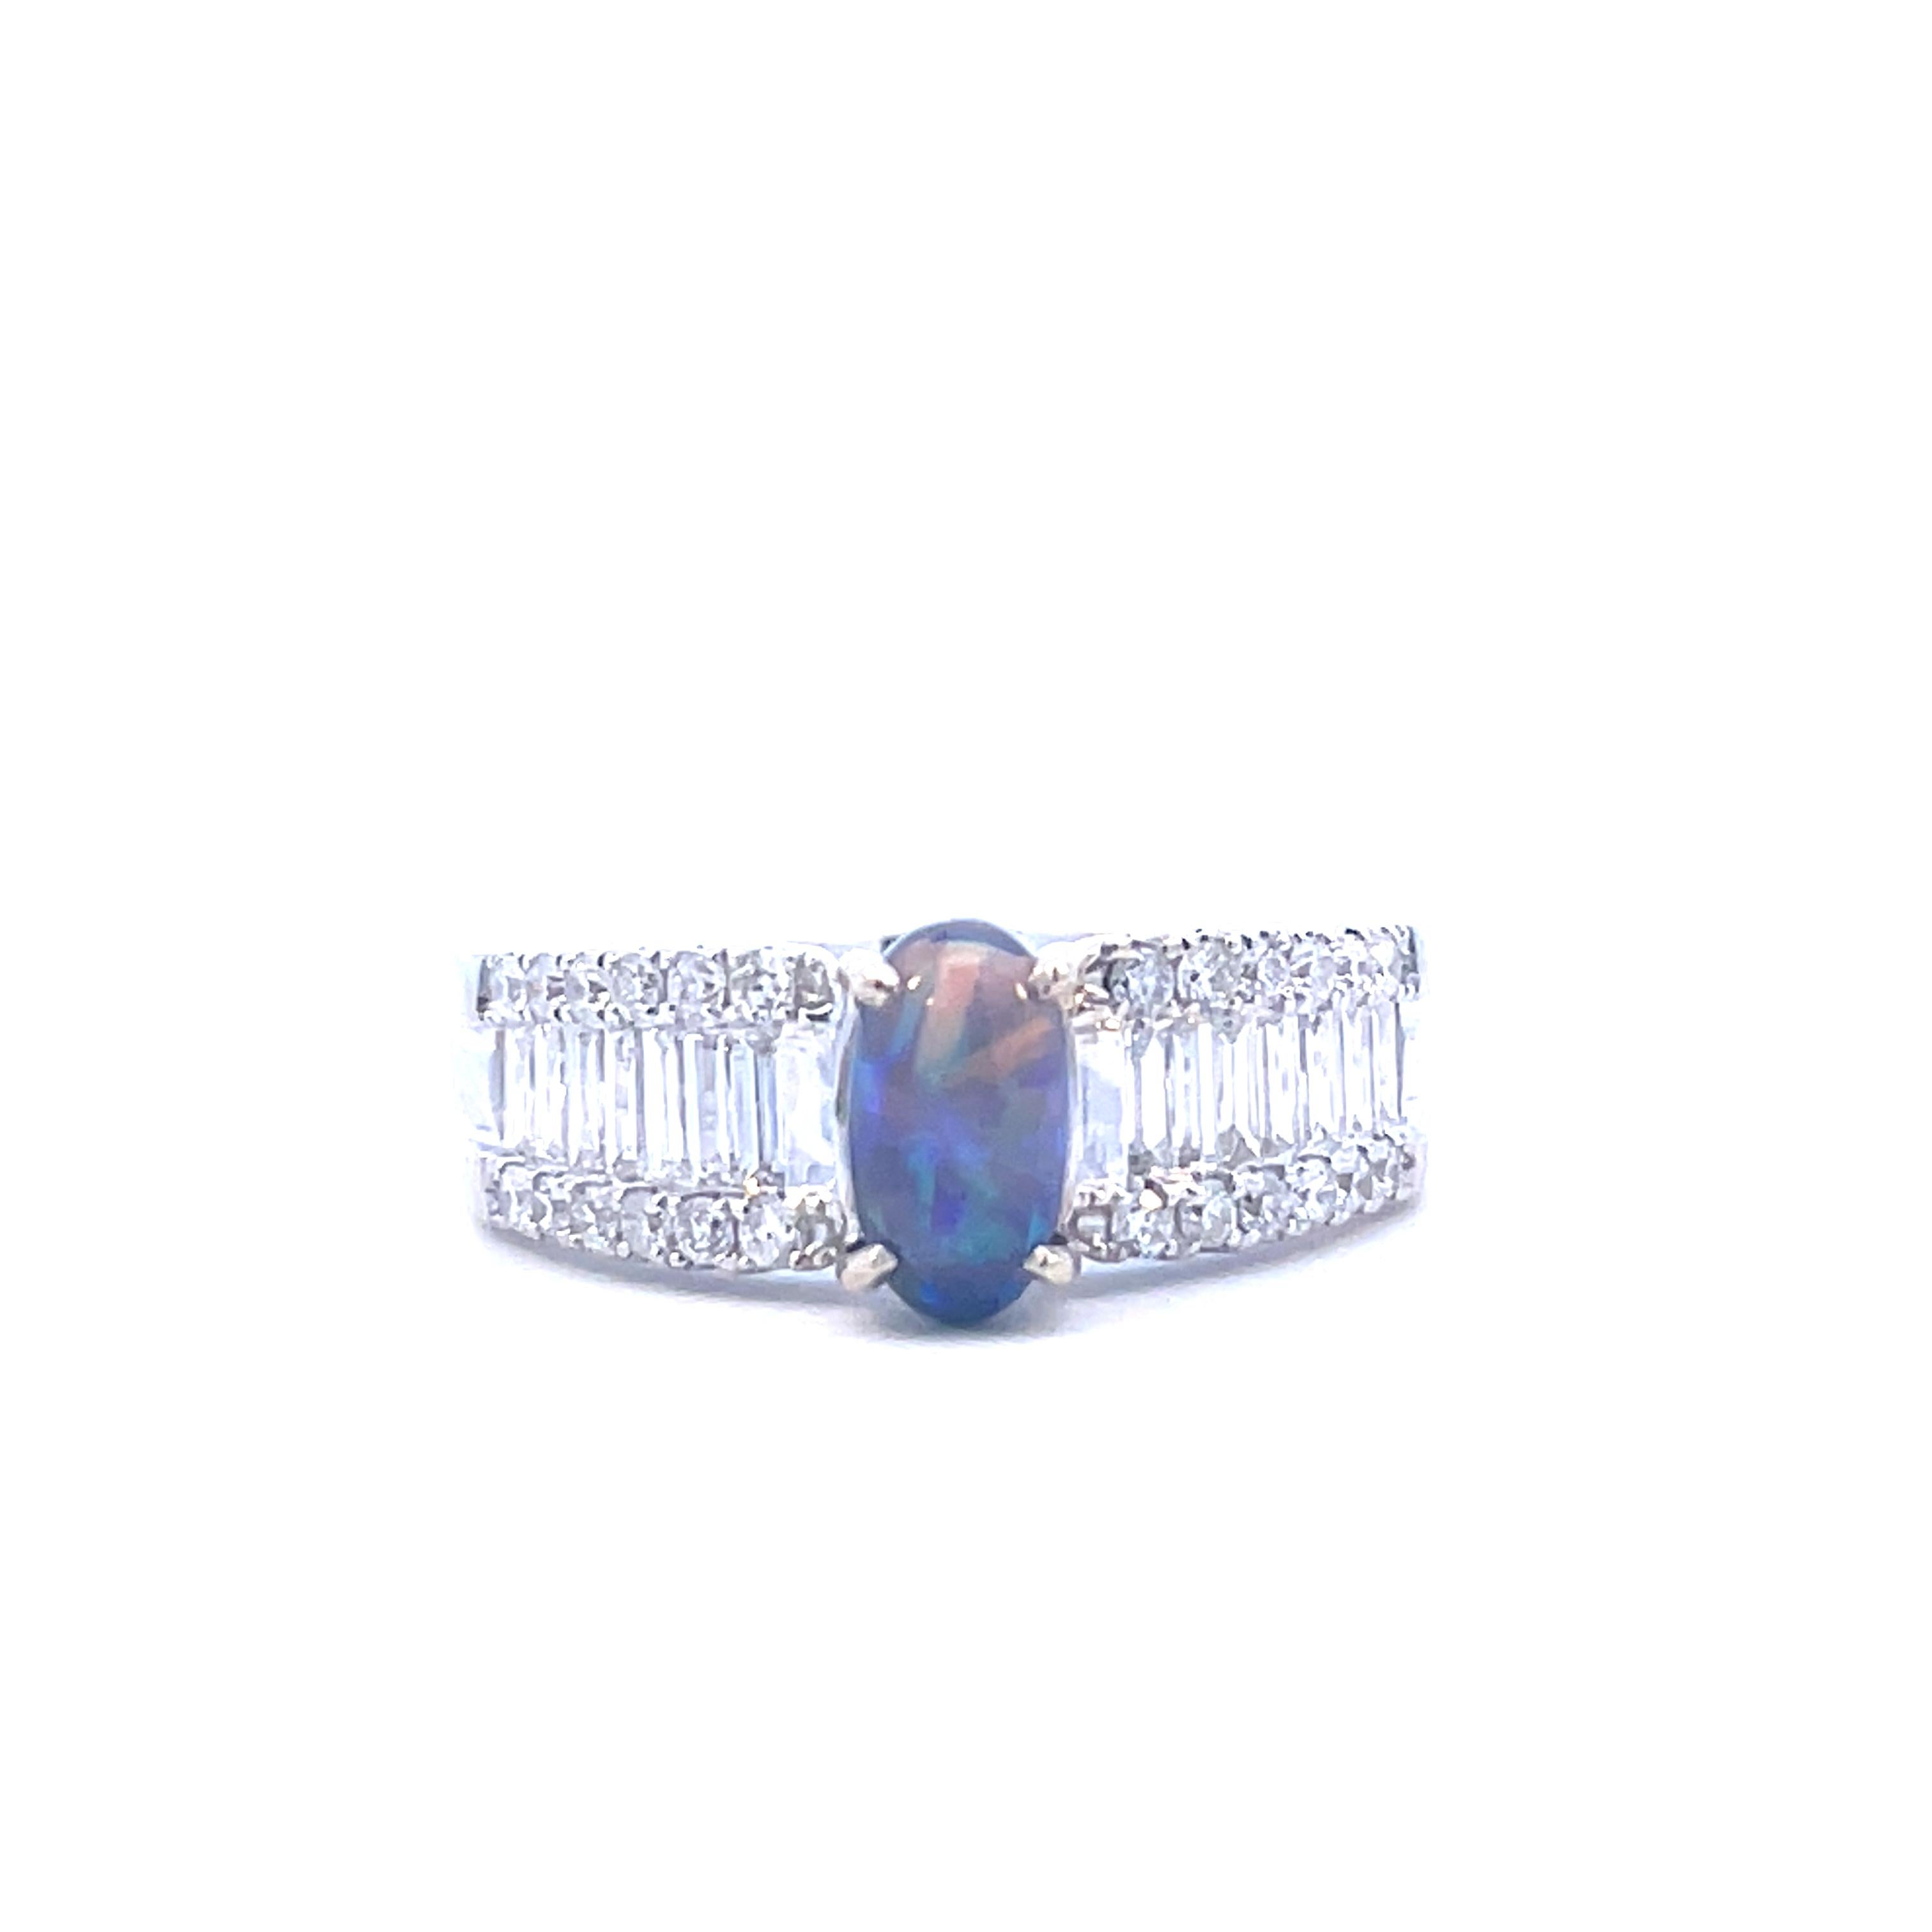 This is a breathtaking 18K white gold and black opal ring set with breathtaking baguette and round diamonds cascading down the sides. The stunning black opal set in this ring will put you in a trance! The color play on the opal is remarkable, and